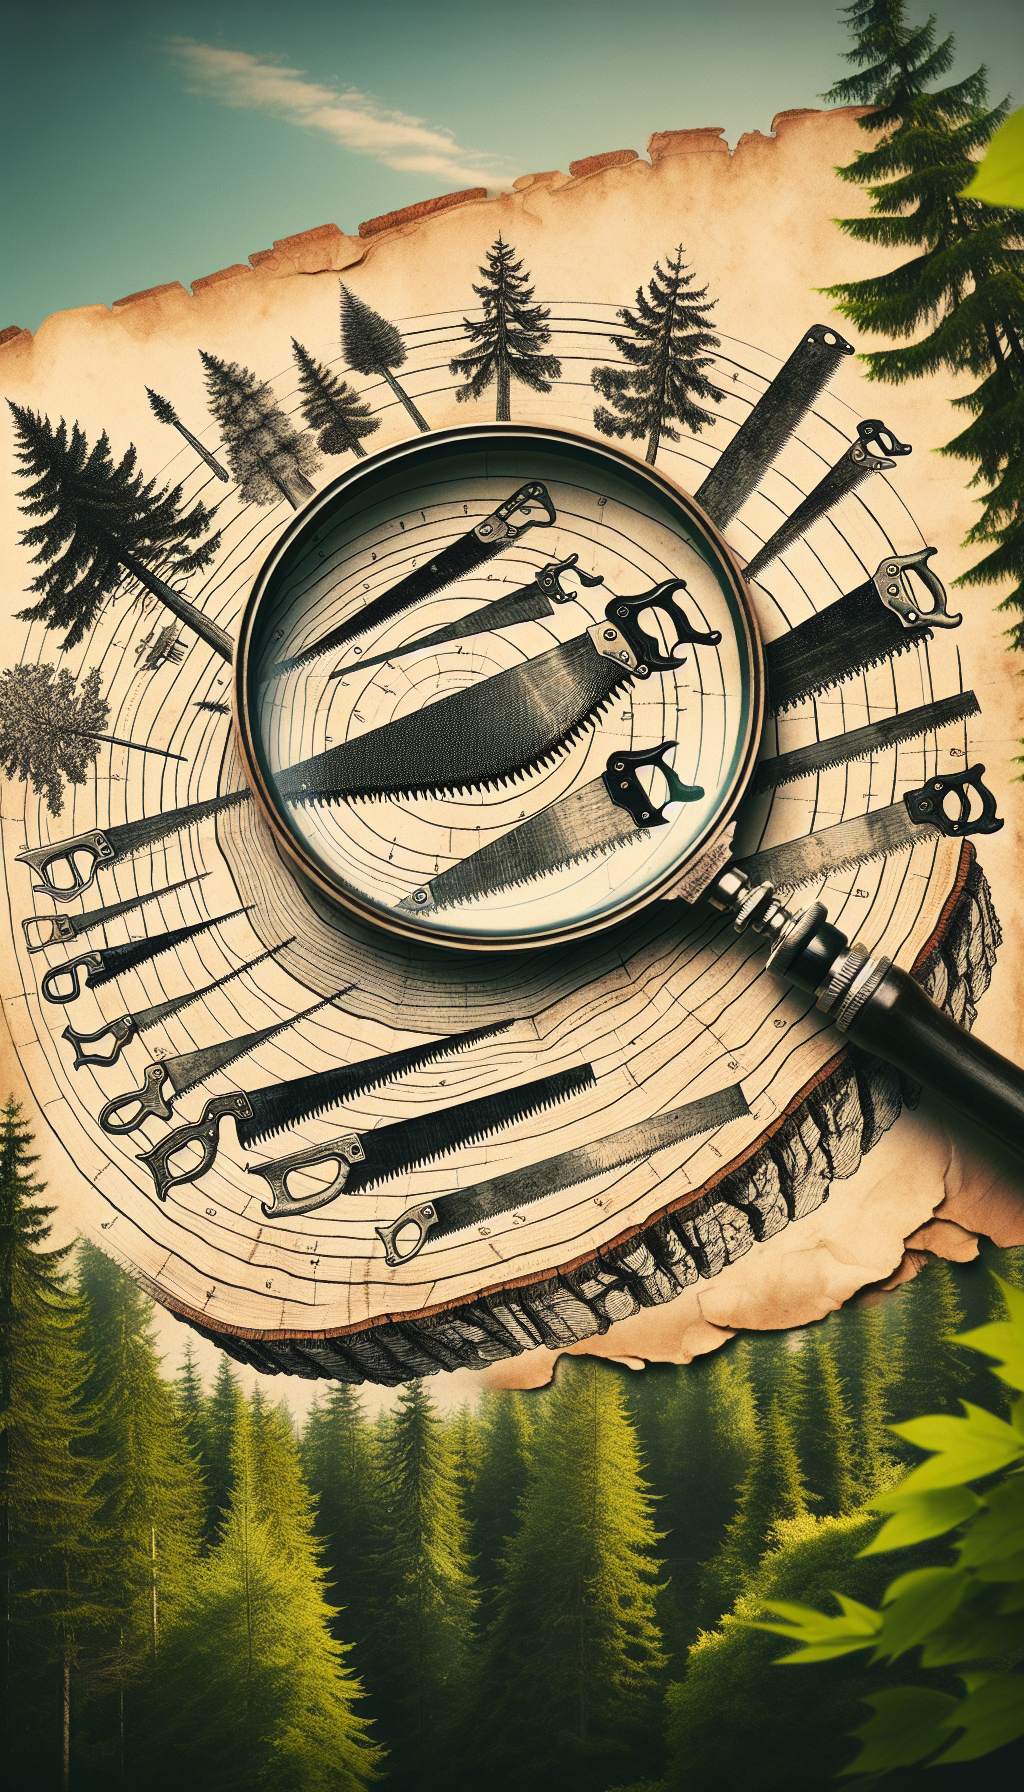 An aged parchment rests against a forest backdrop, showcasing detailed sketched silhouettes of different antique crosscut saws, each labeled with its era and unique characteristics. Concentric tree rings subtly emerge in the background, doubling as a timeline, while a magnifying glass hovers over one saw, highlighting the intricate tooth pattern for identification, blending history with the mystique of woodland discovery.